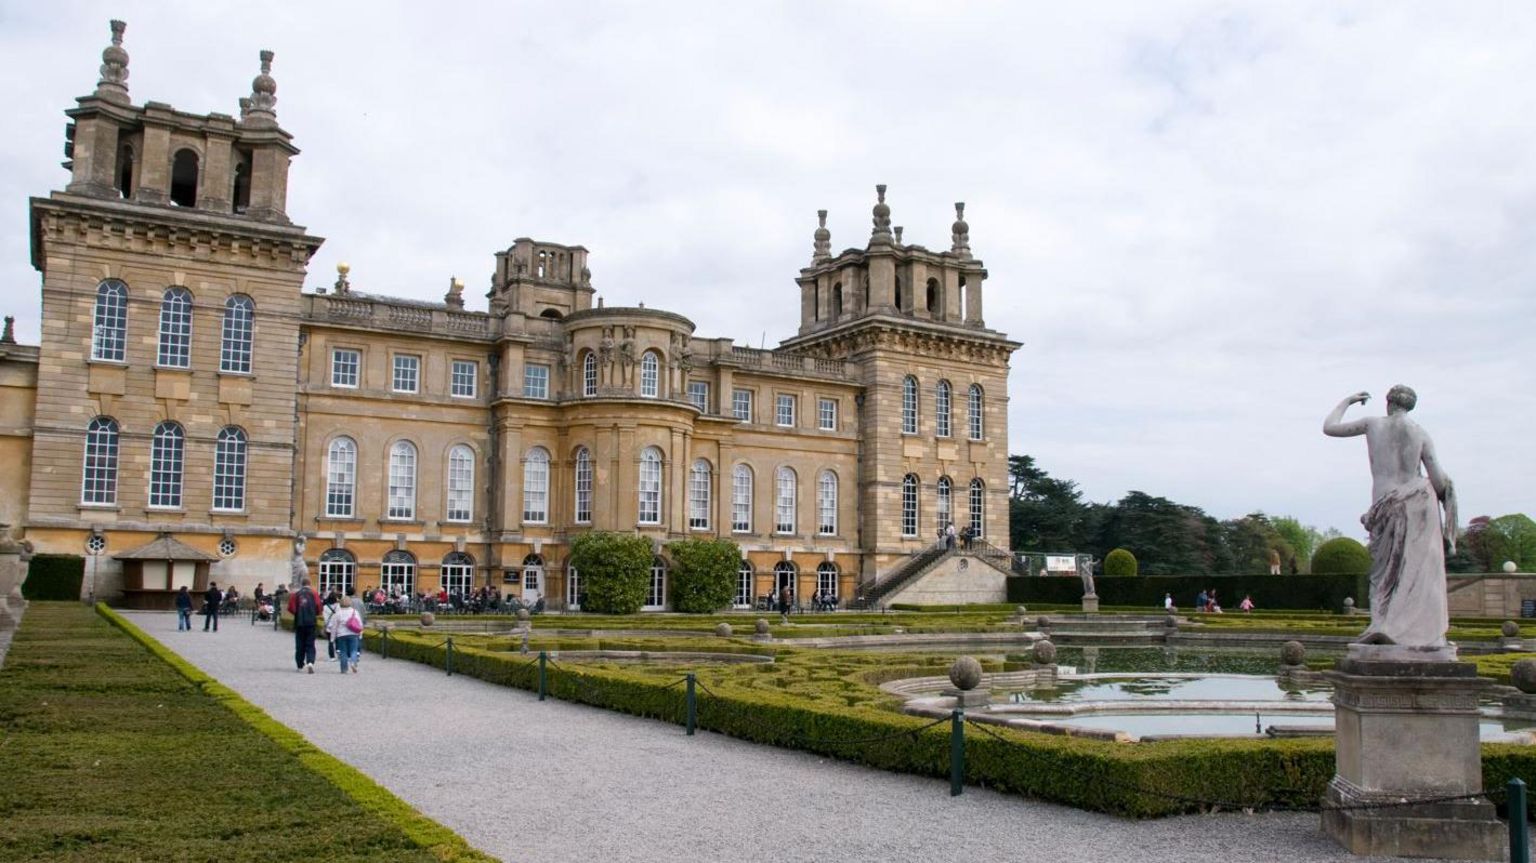 General exterior view of Blenheim Palace at Woodstock near Oxford